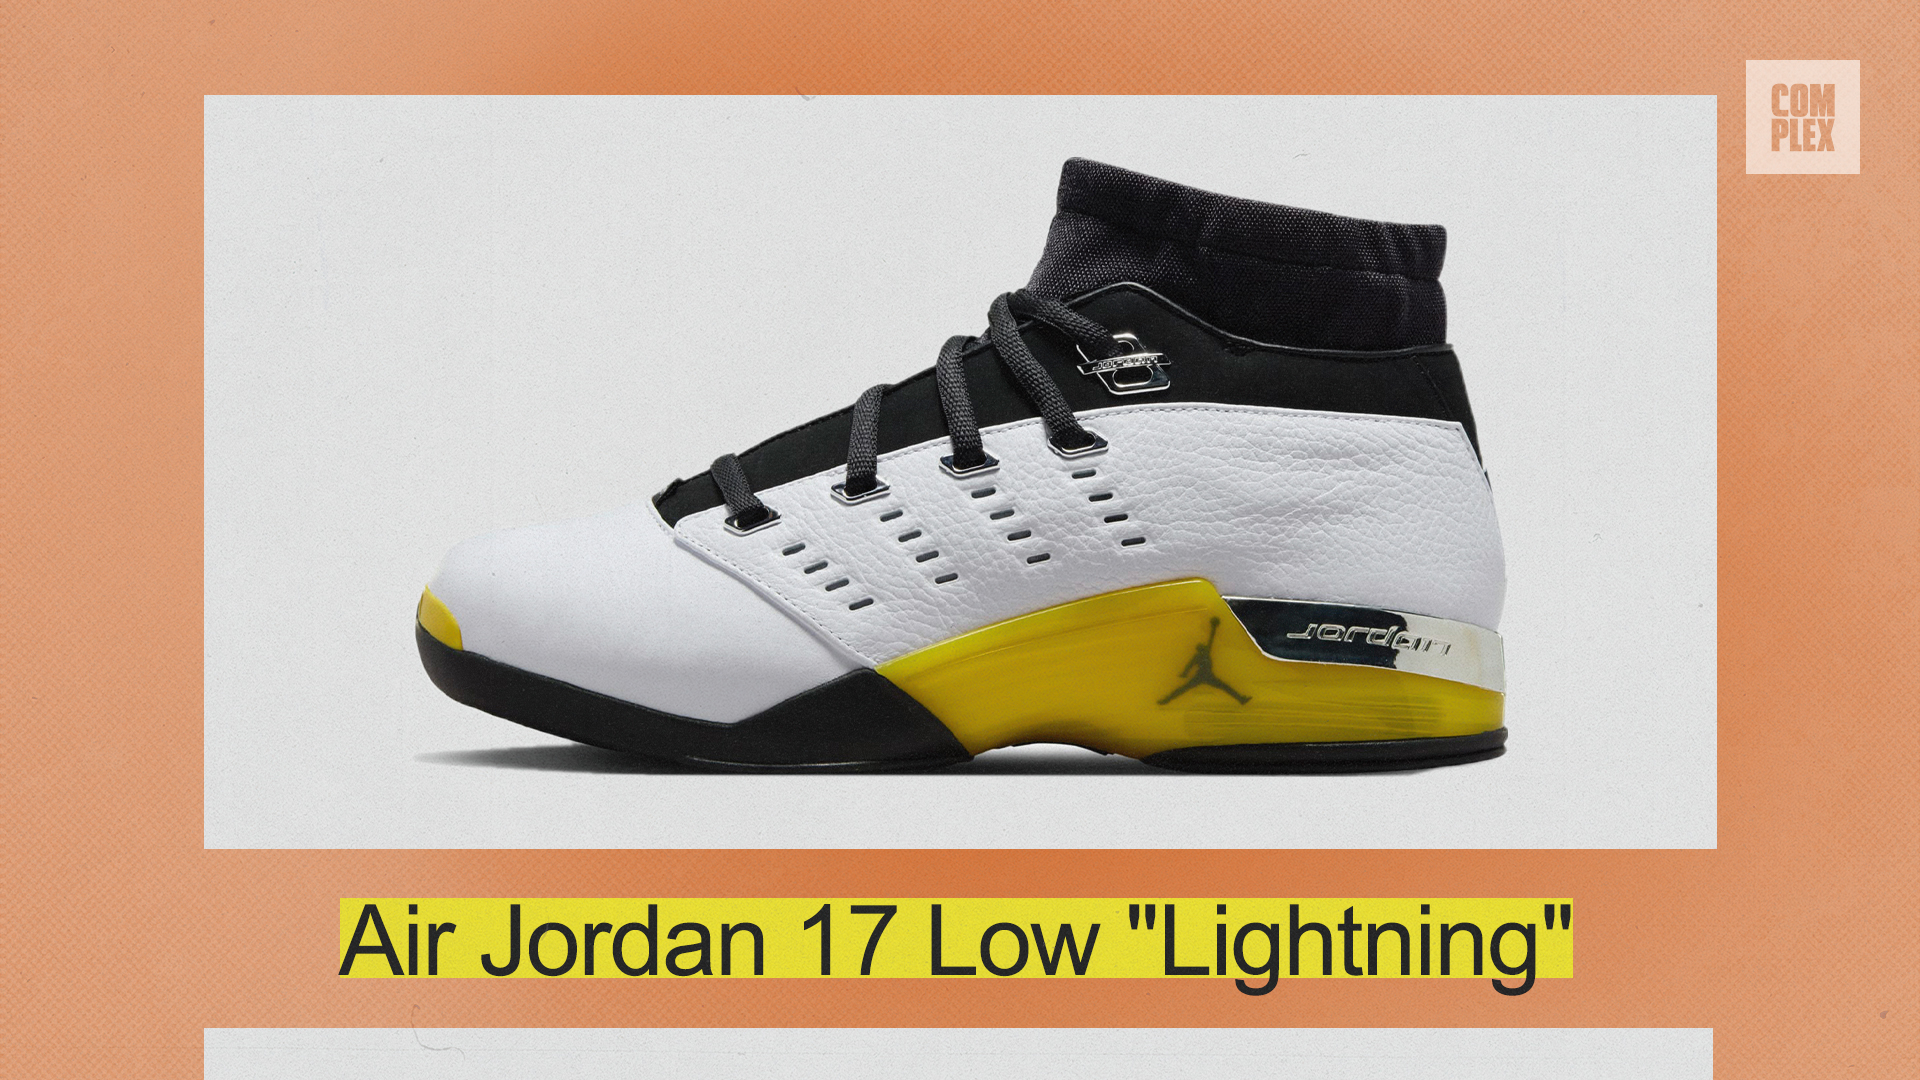 Air Jordan 17 Low &quot;Lightning&quot; sneaker displayed, featuring a white body, black laces, and yellow accents. Image sourced from Complex